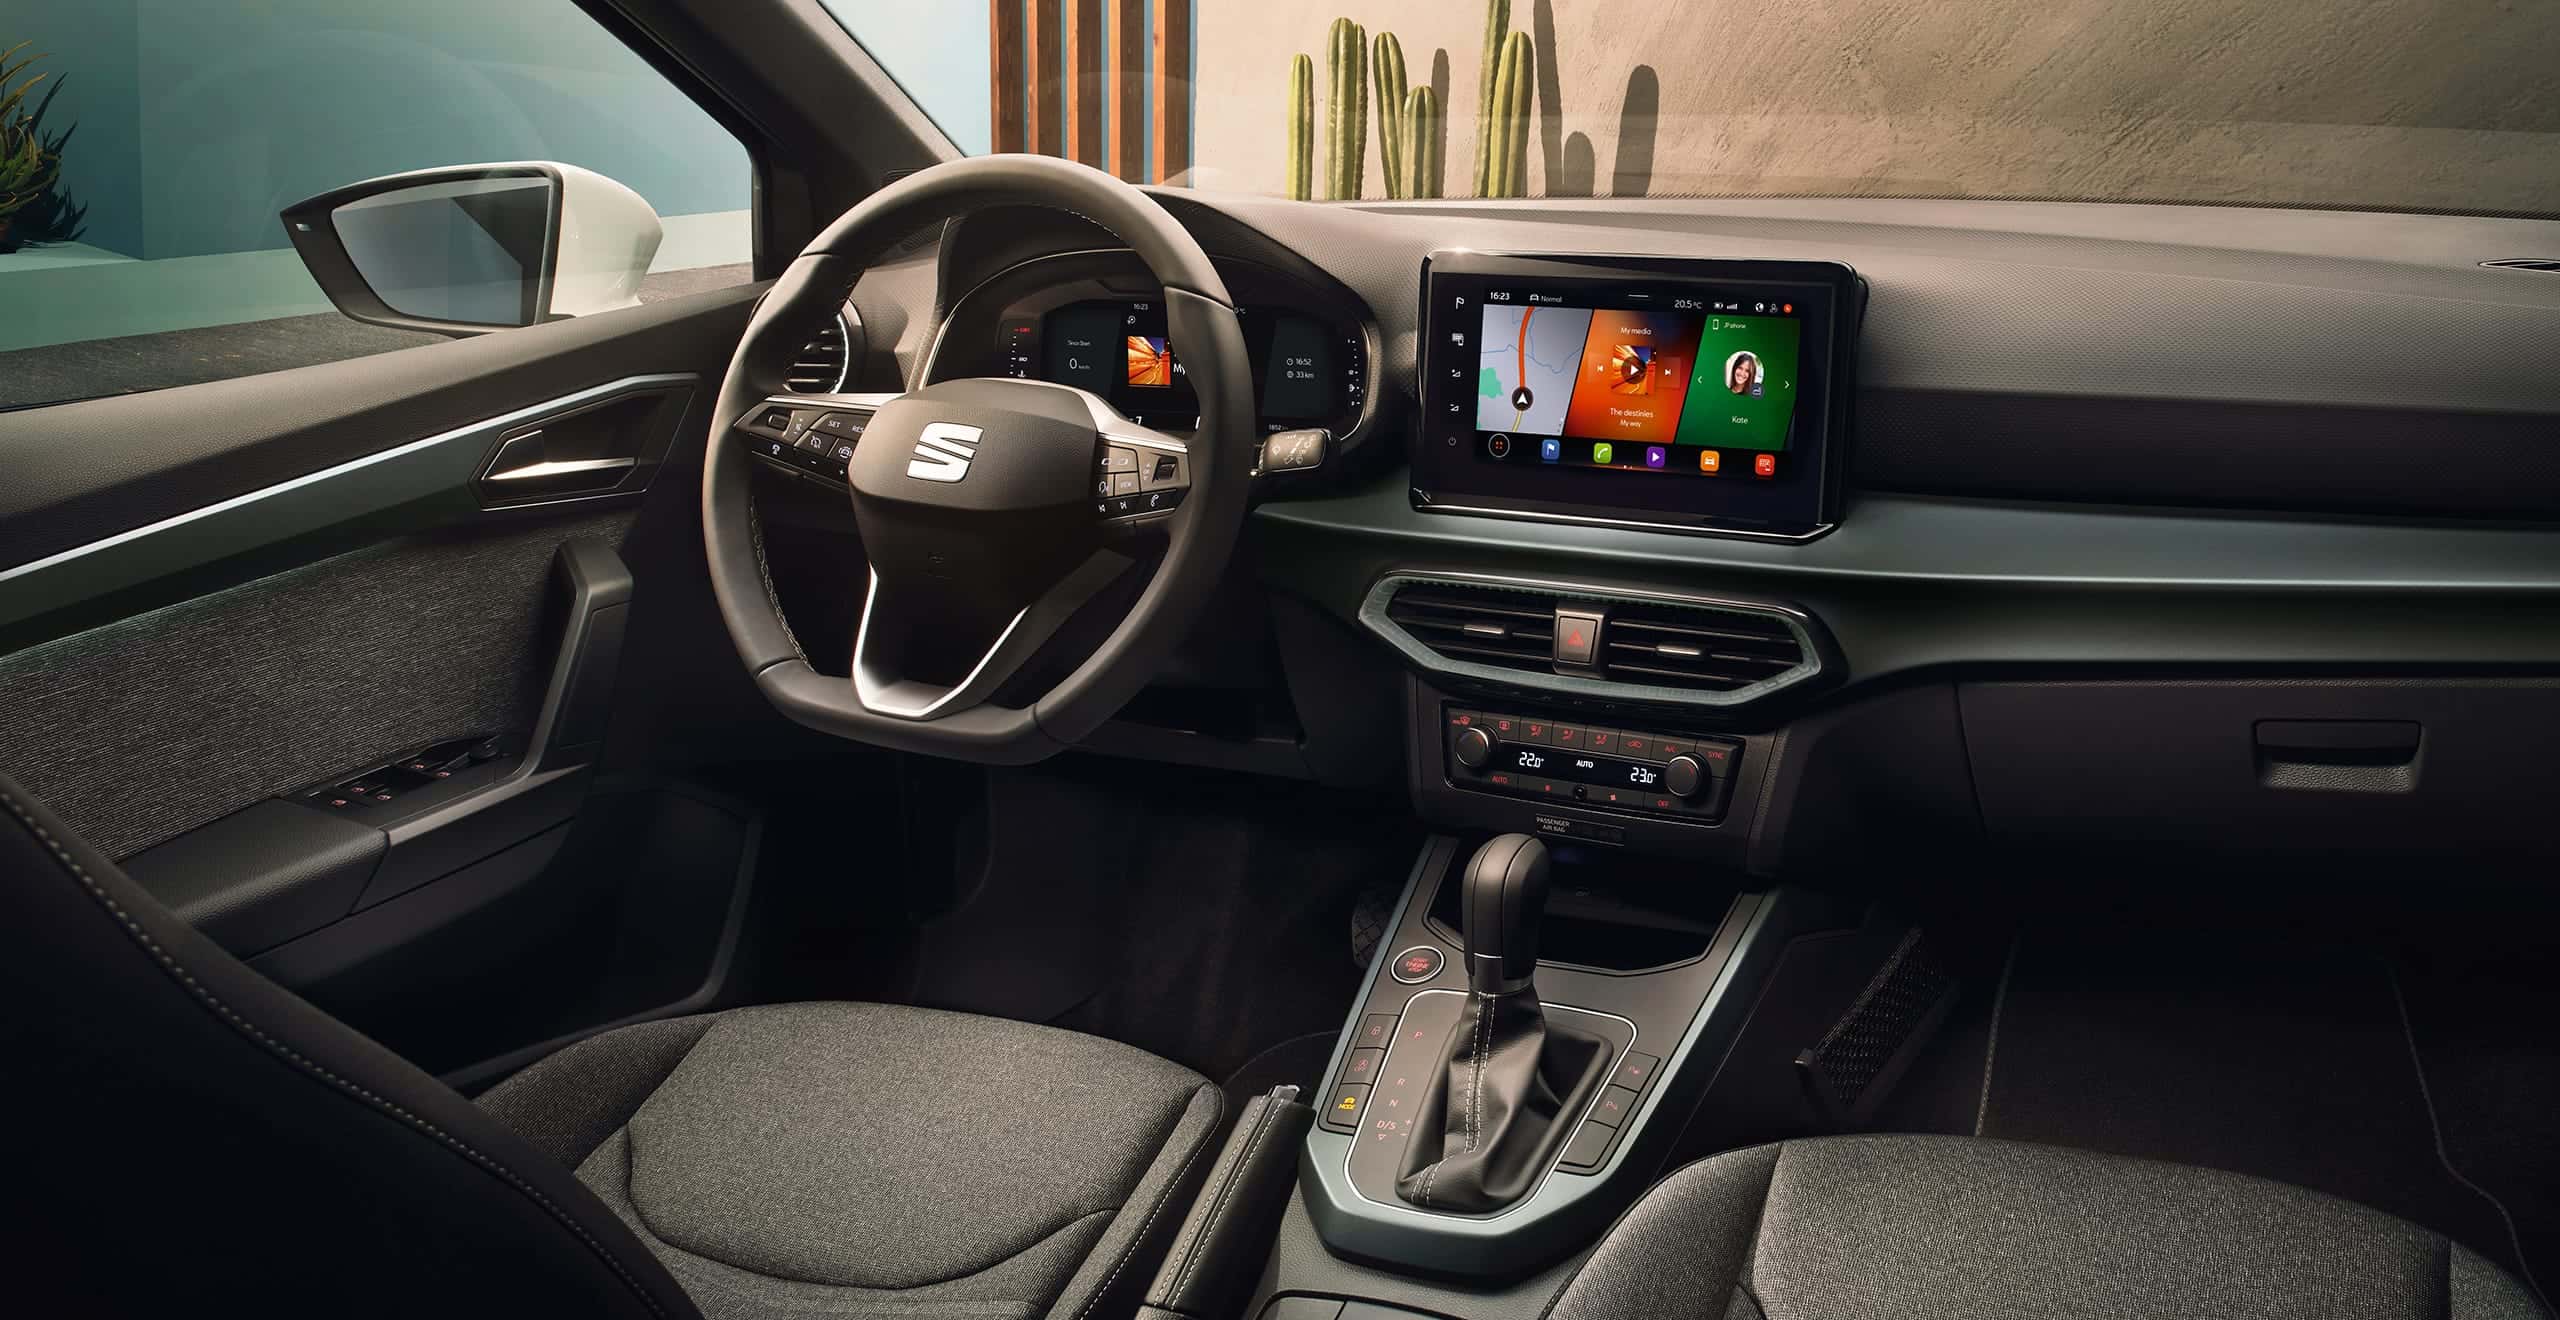 SEAT Arona interior view of the floating 9.2″ touchscreen and multifunctional steering wheel